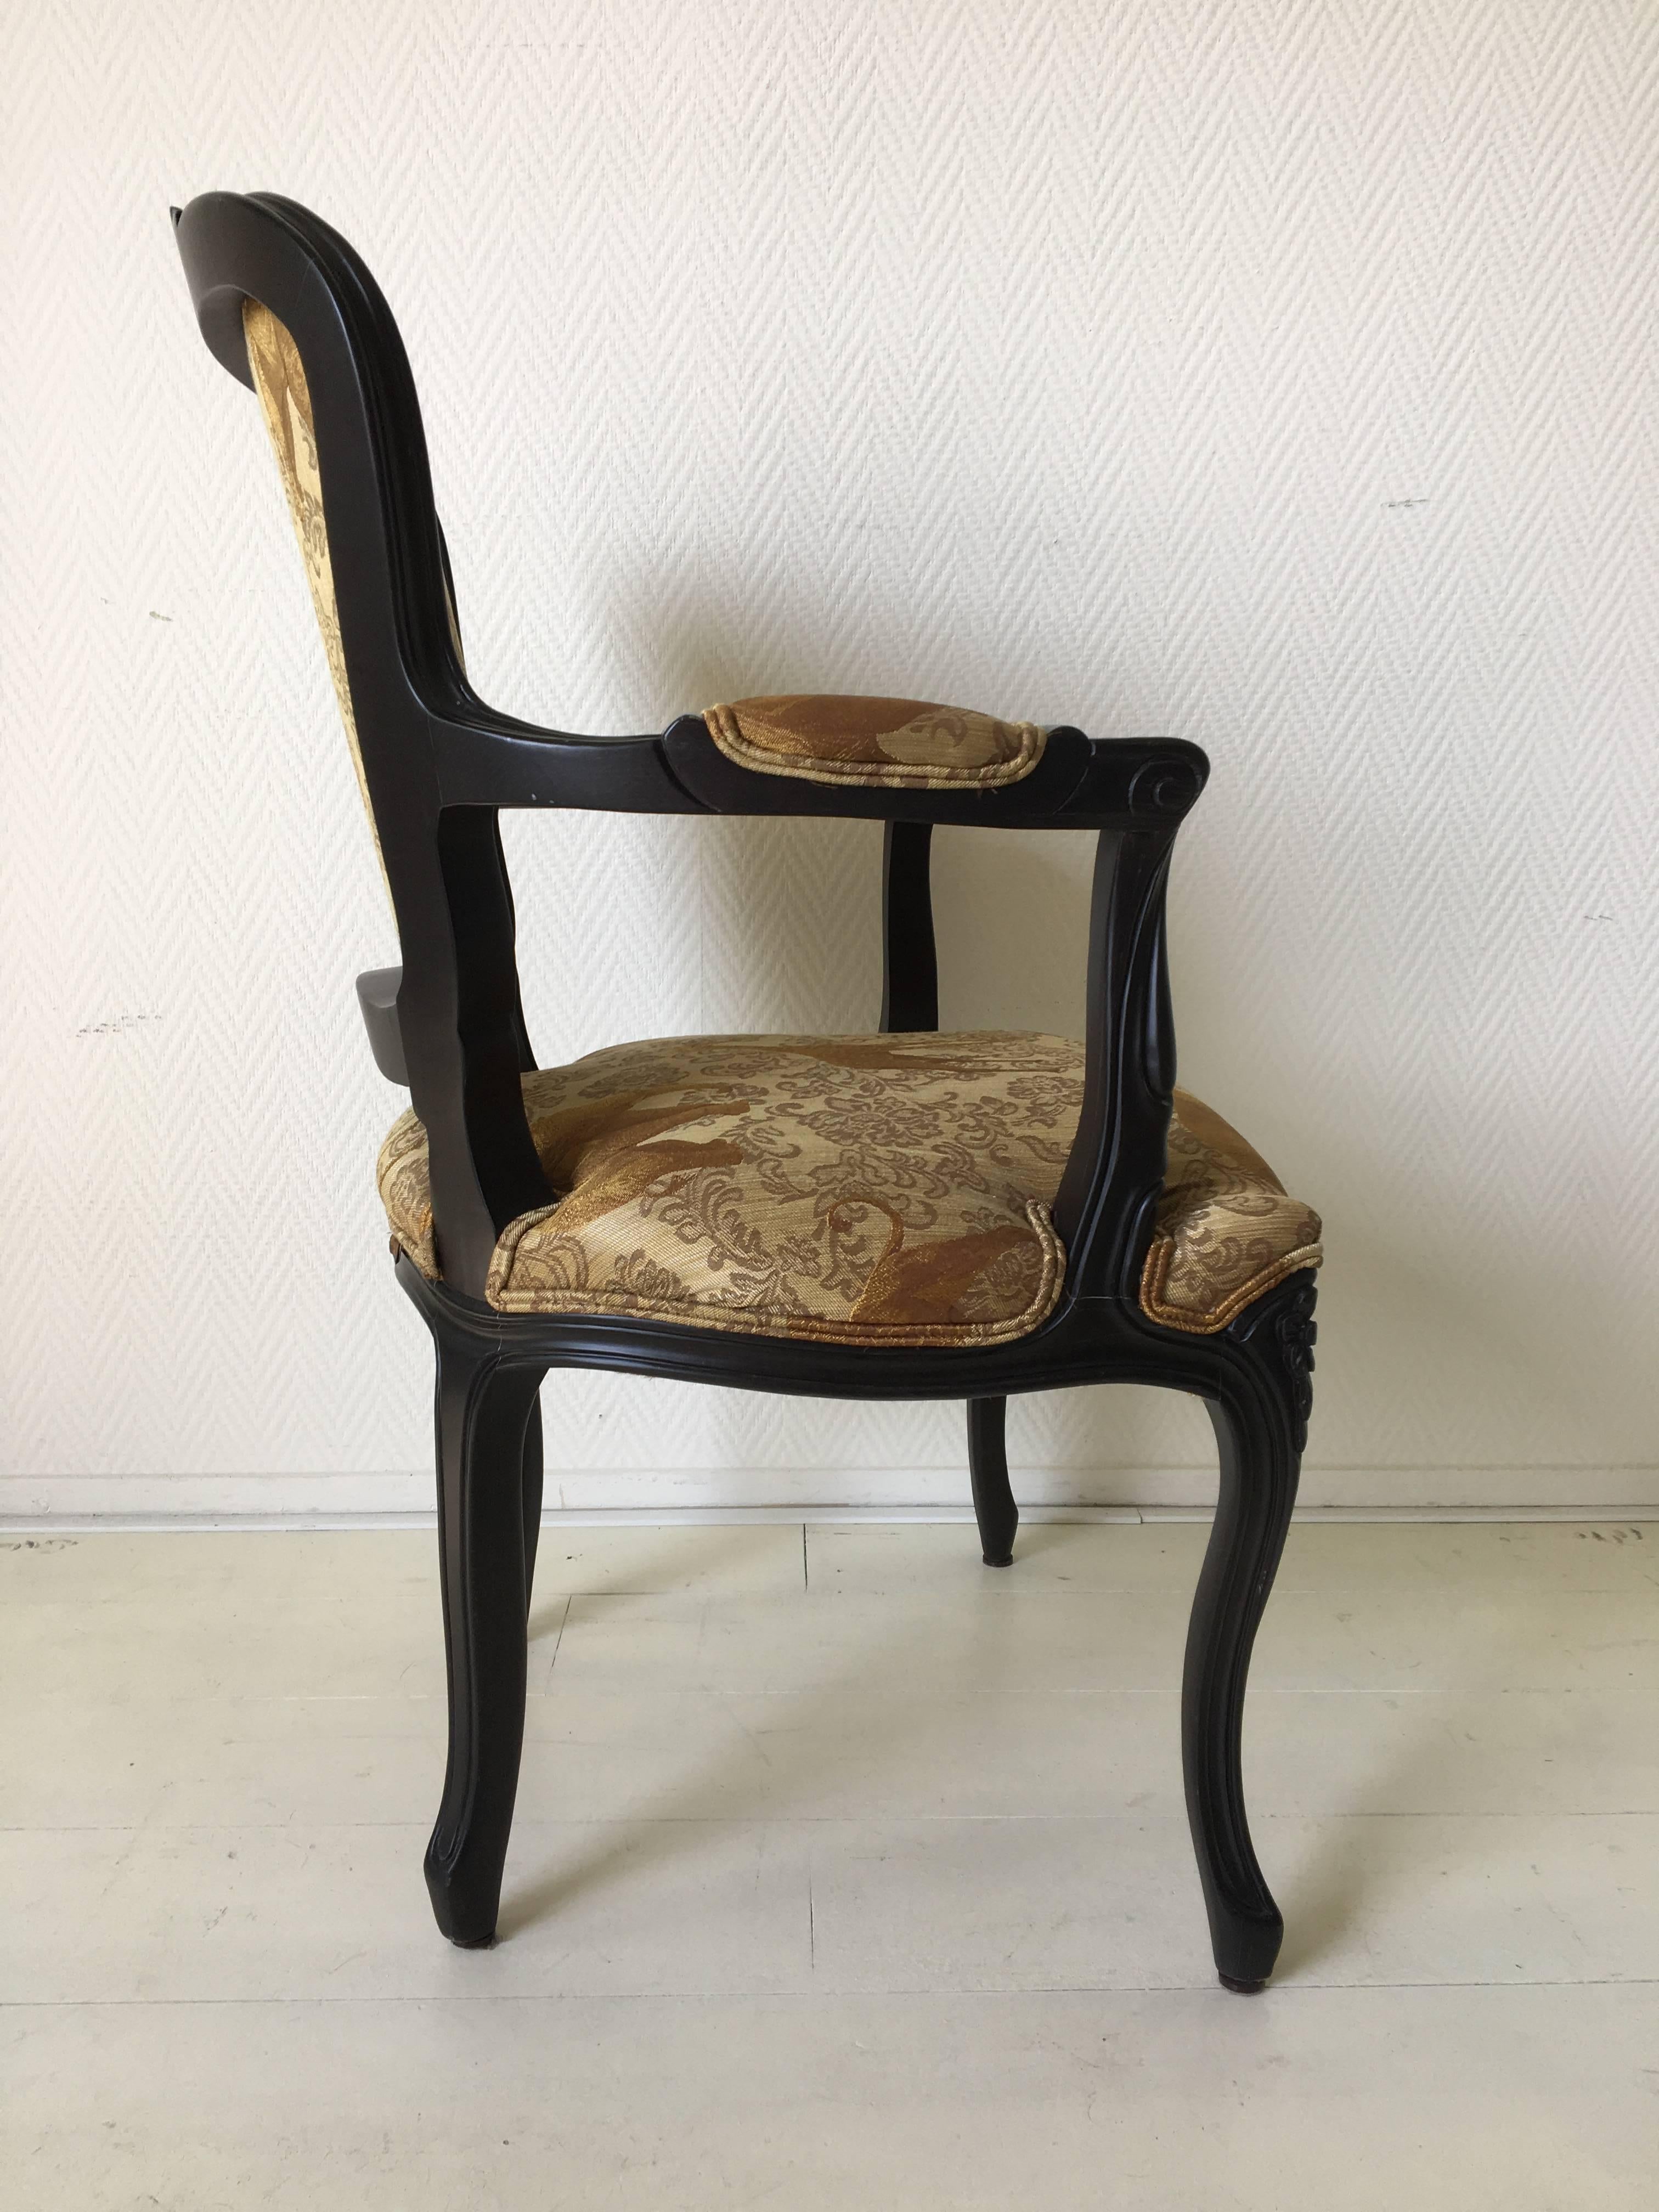 Contemporary Black Baroque Armchair with Wildlife Designed Fabric by Ascension Latorre, Spain For Sale